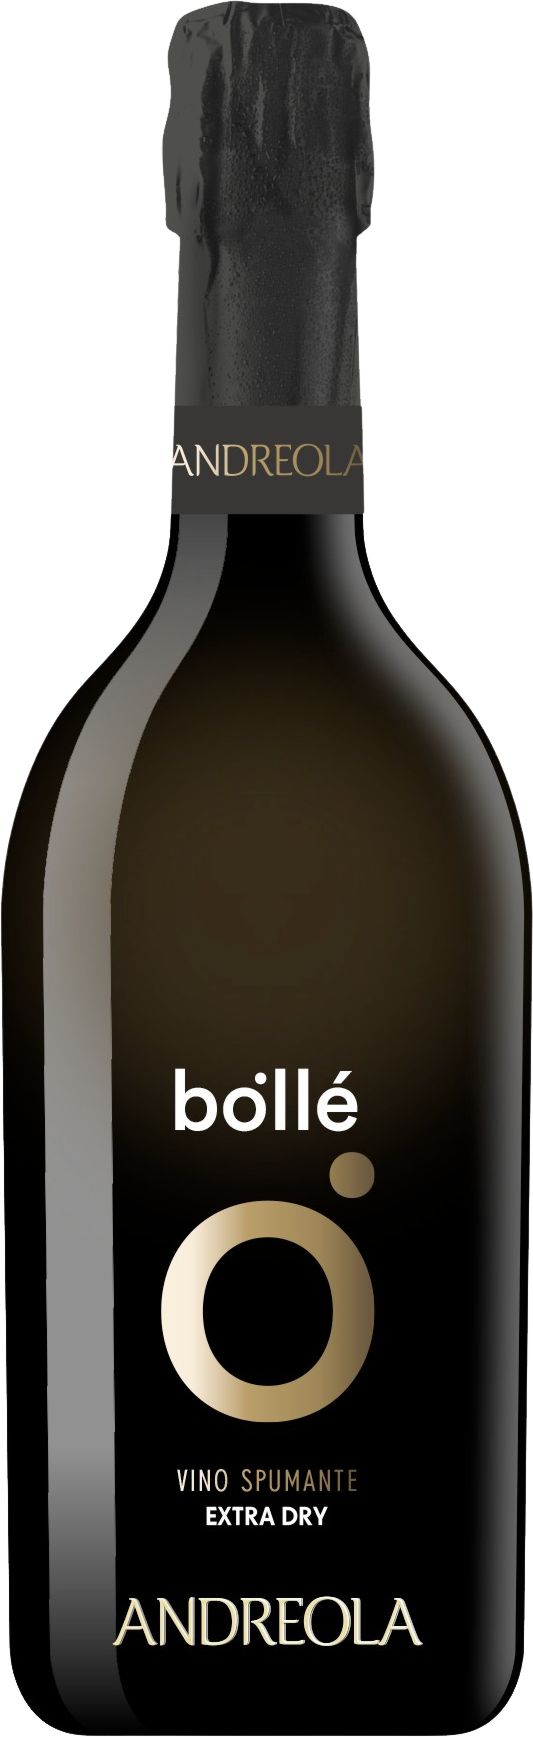 Andreola Bolle Vino Spumante Extra Dry